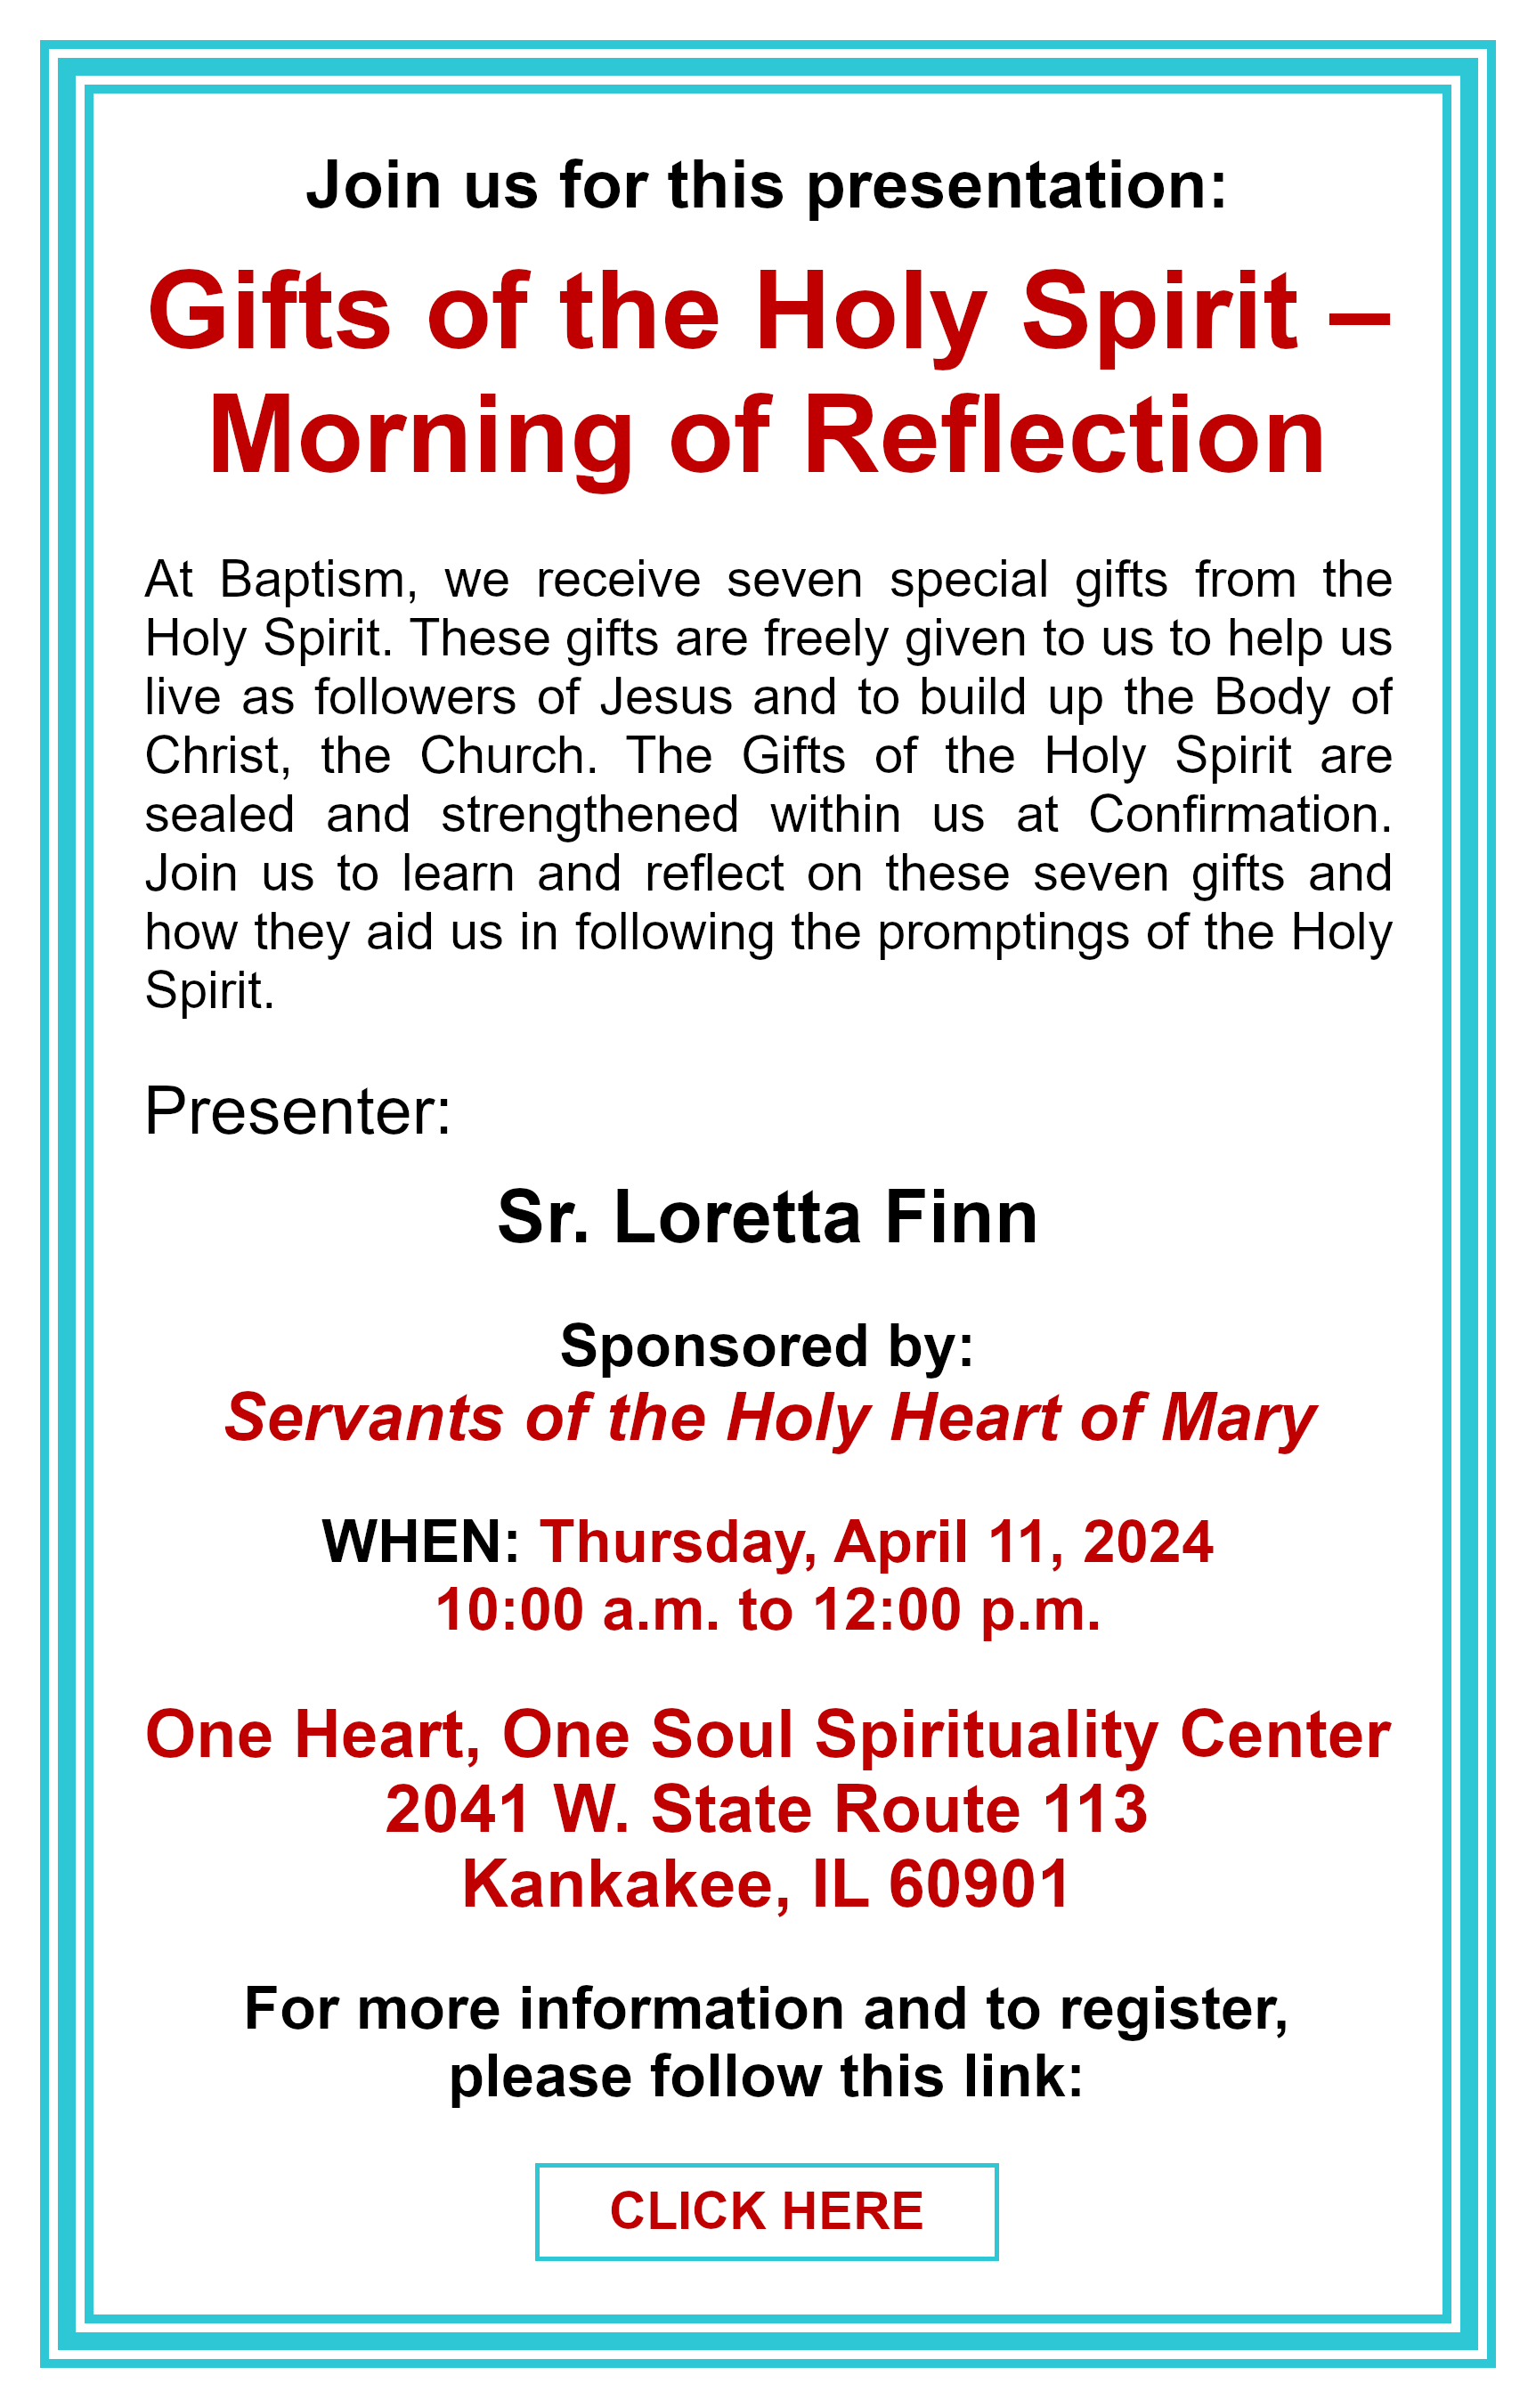 Gifts of the Holy Spirit – Morning of Reflection: Click here for more information